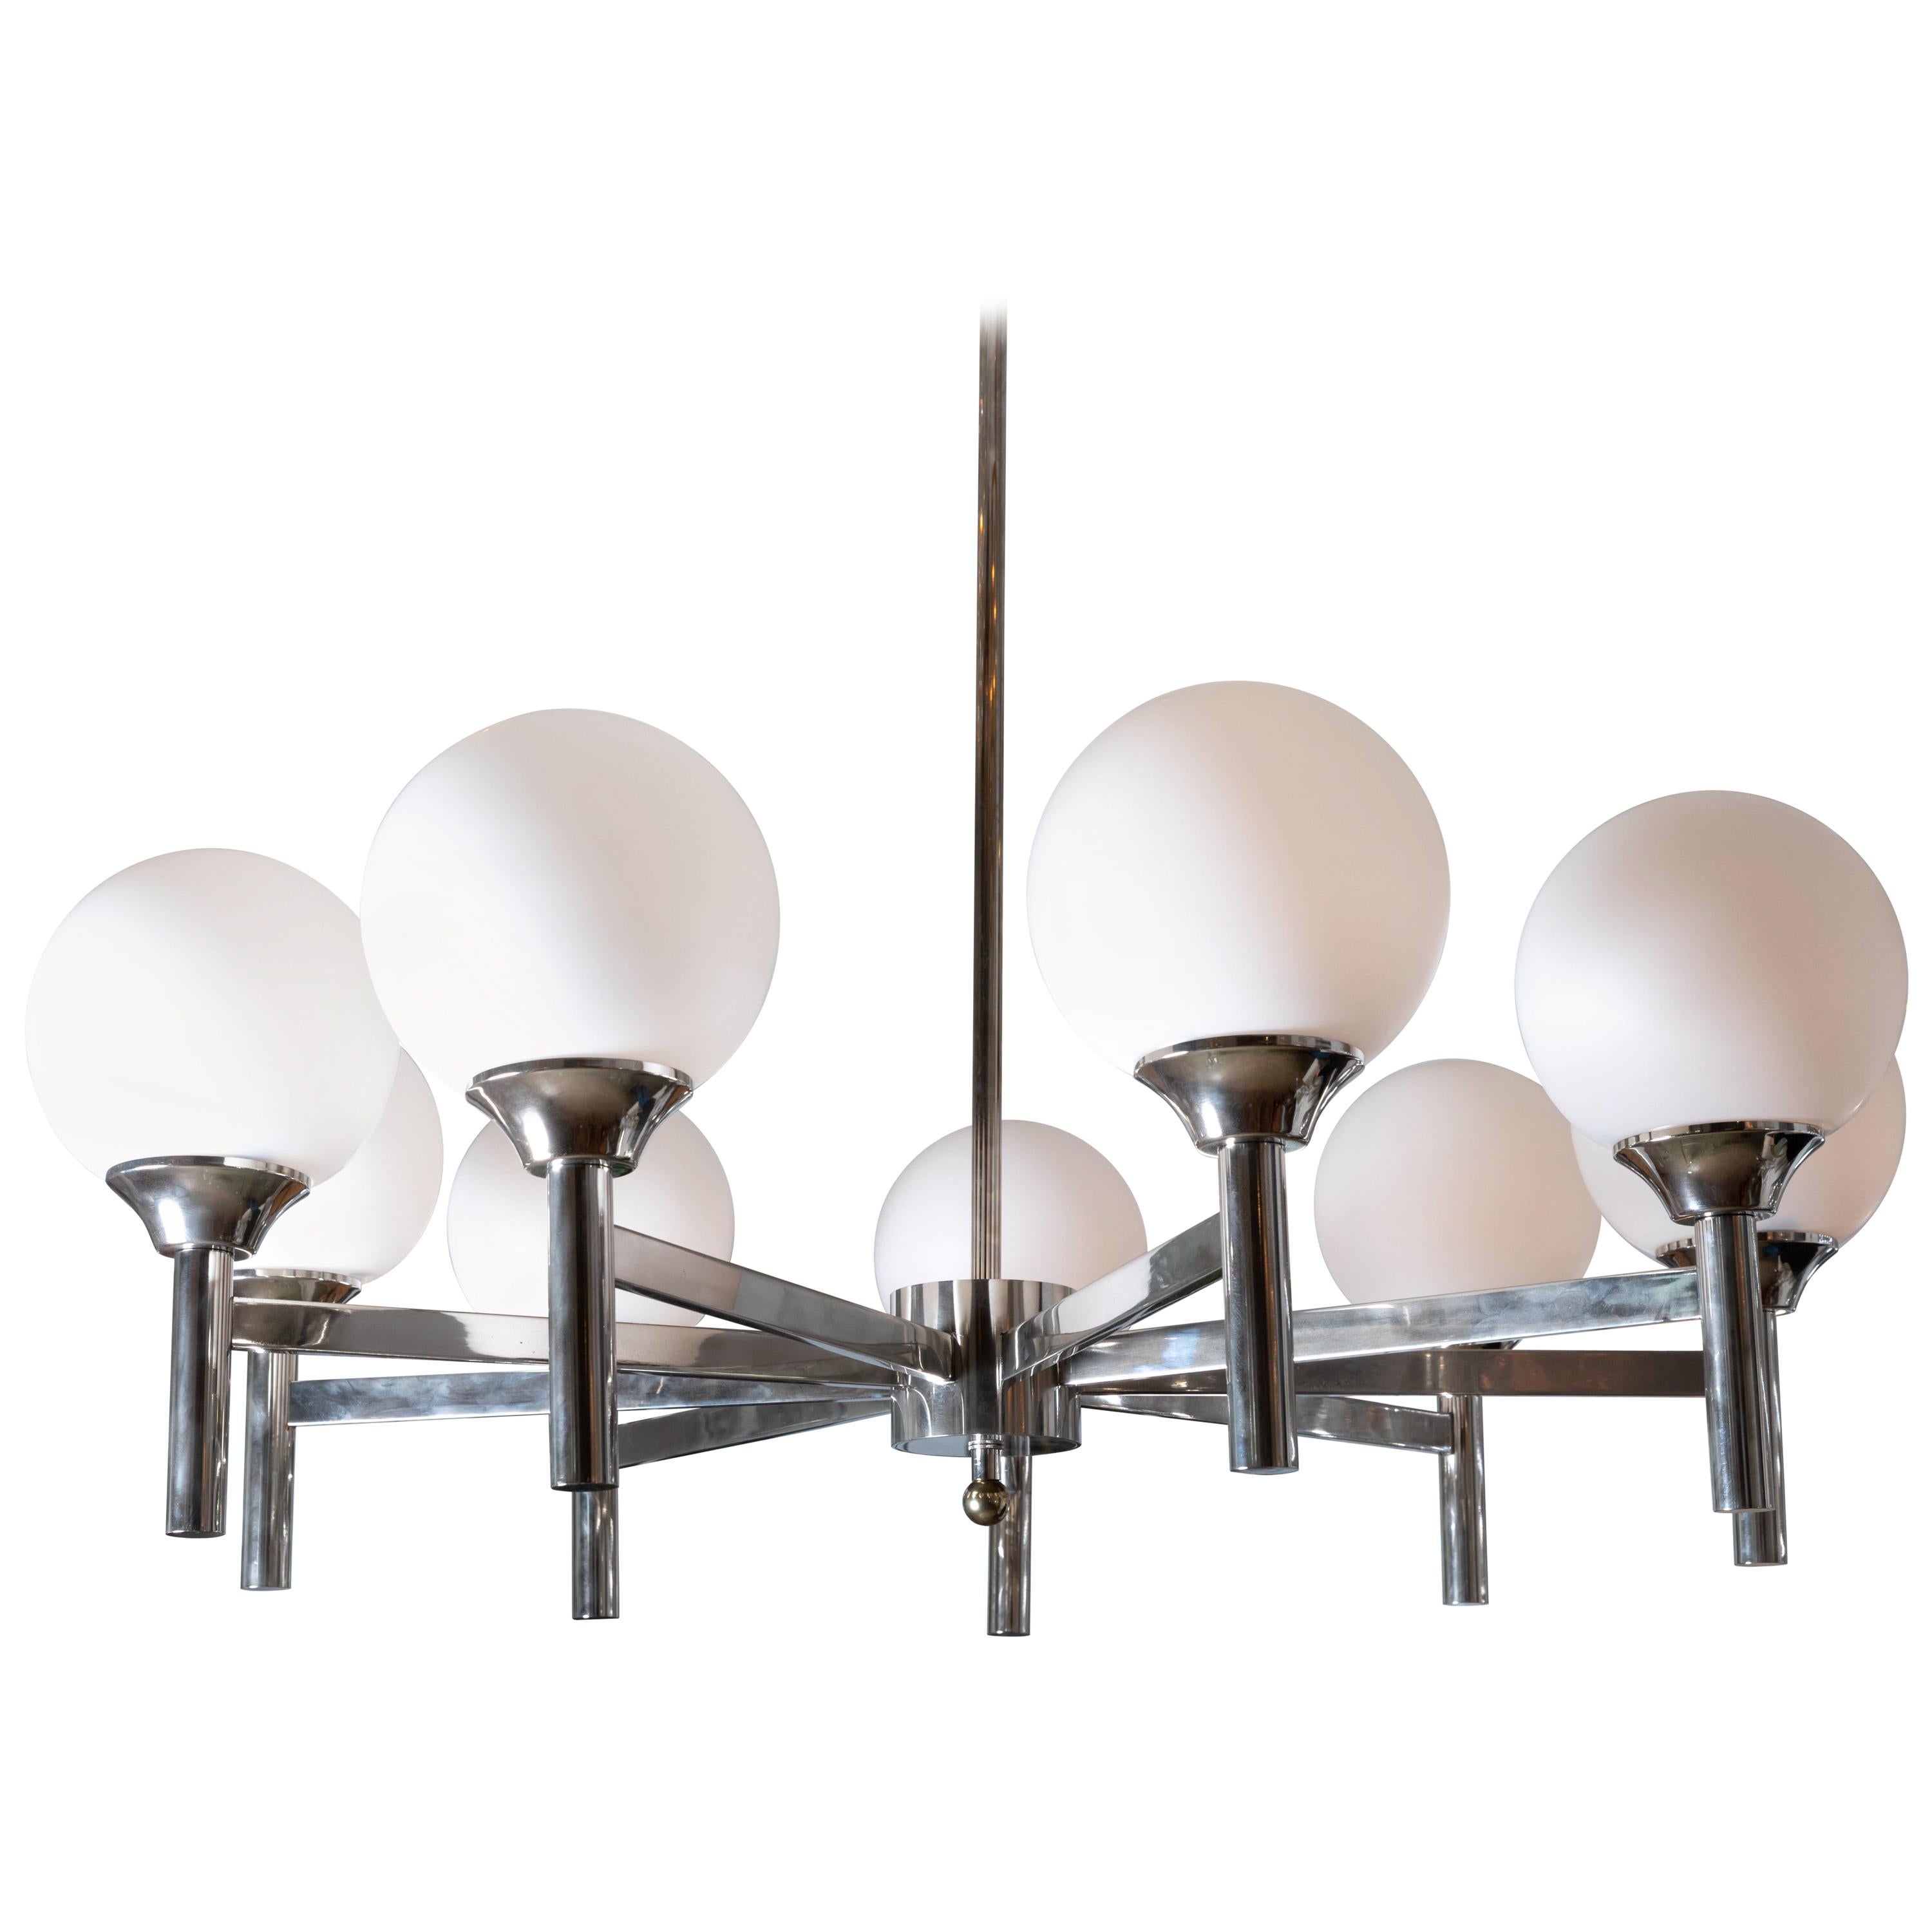 Polished Nickel "Spoke" Form Nine-Arm Chandelier with Frosted Glass Shades